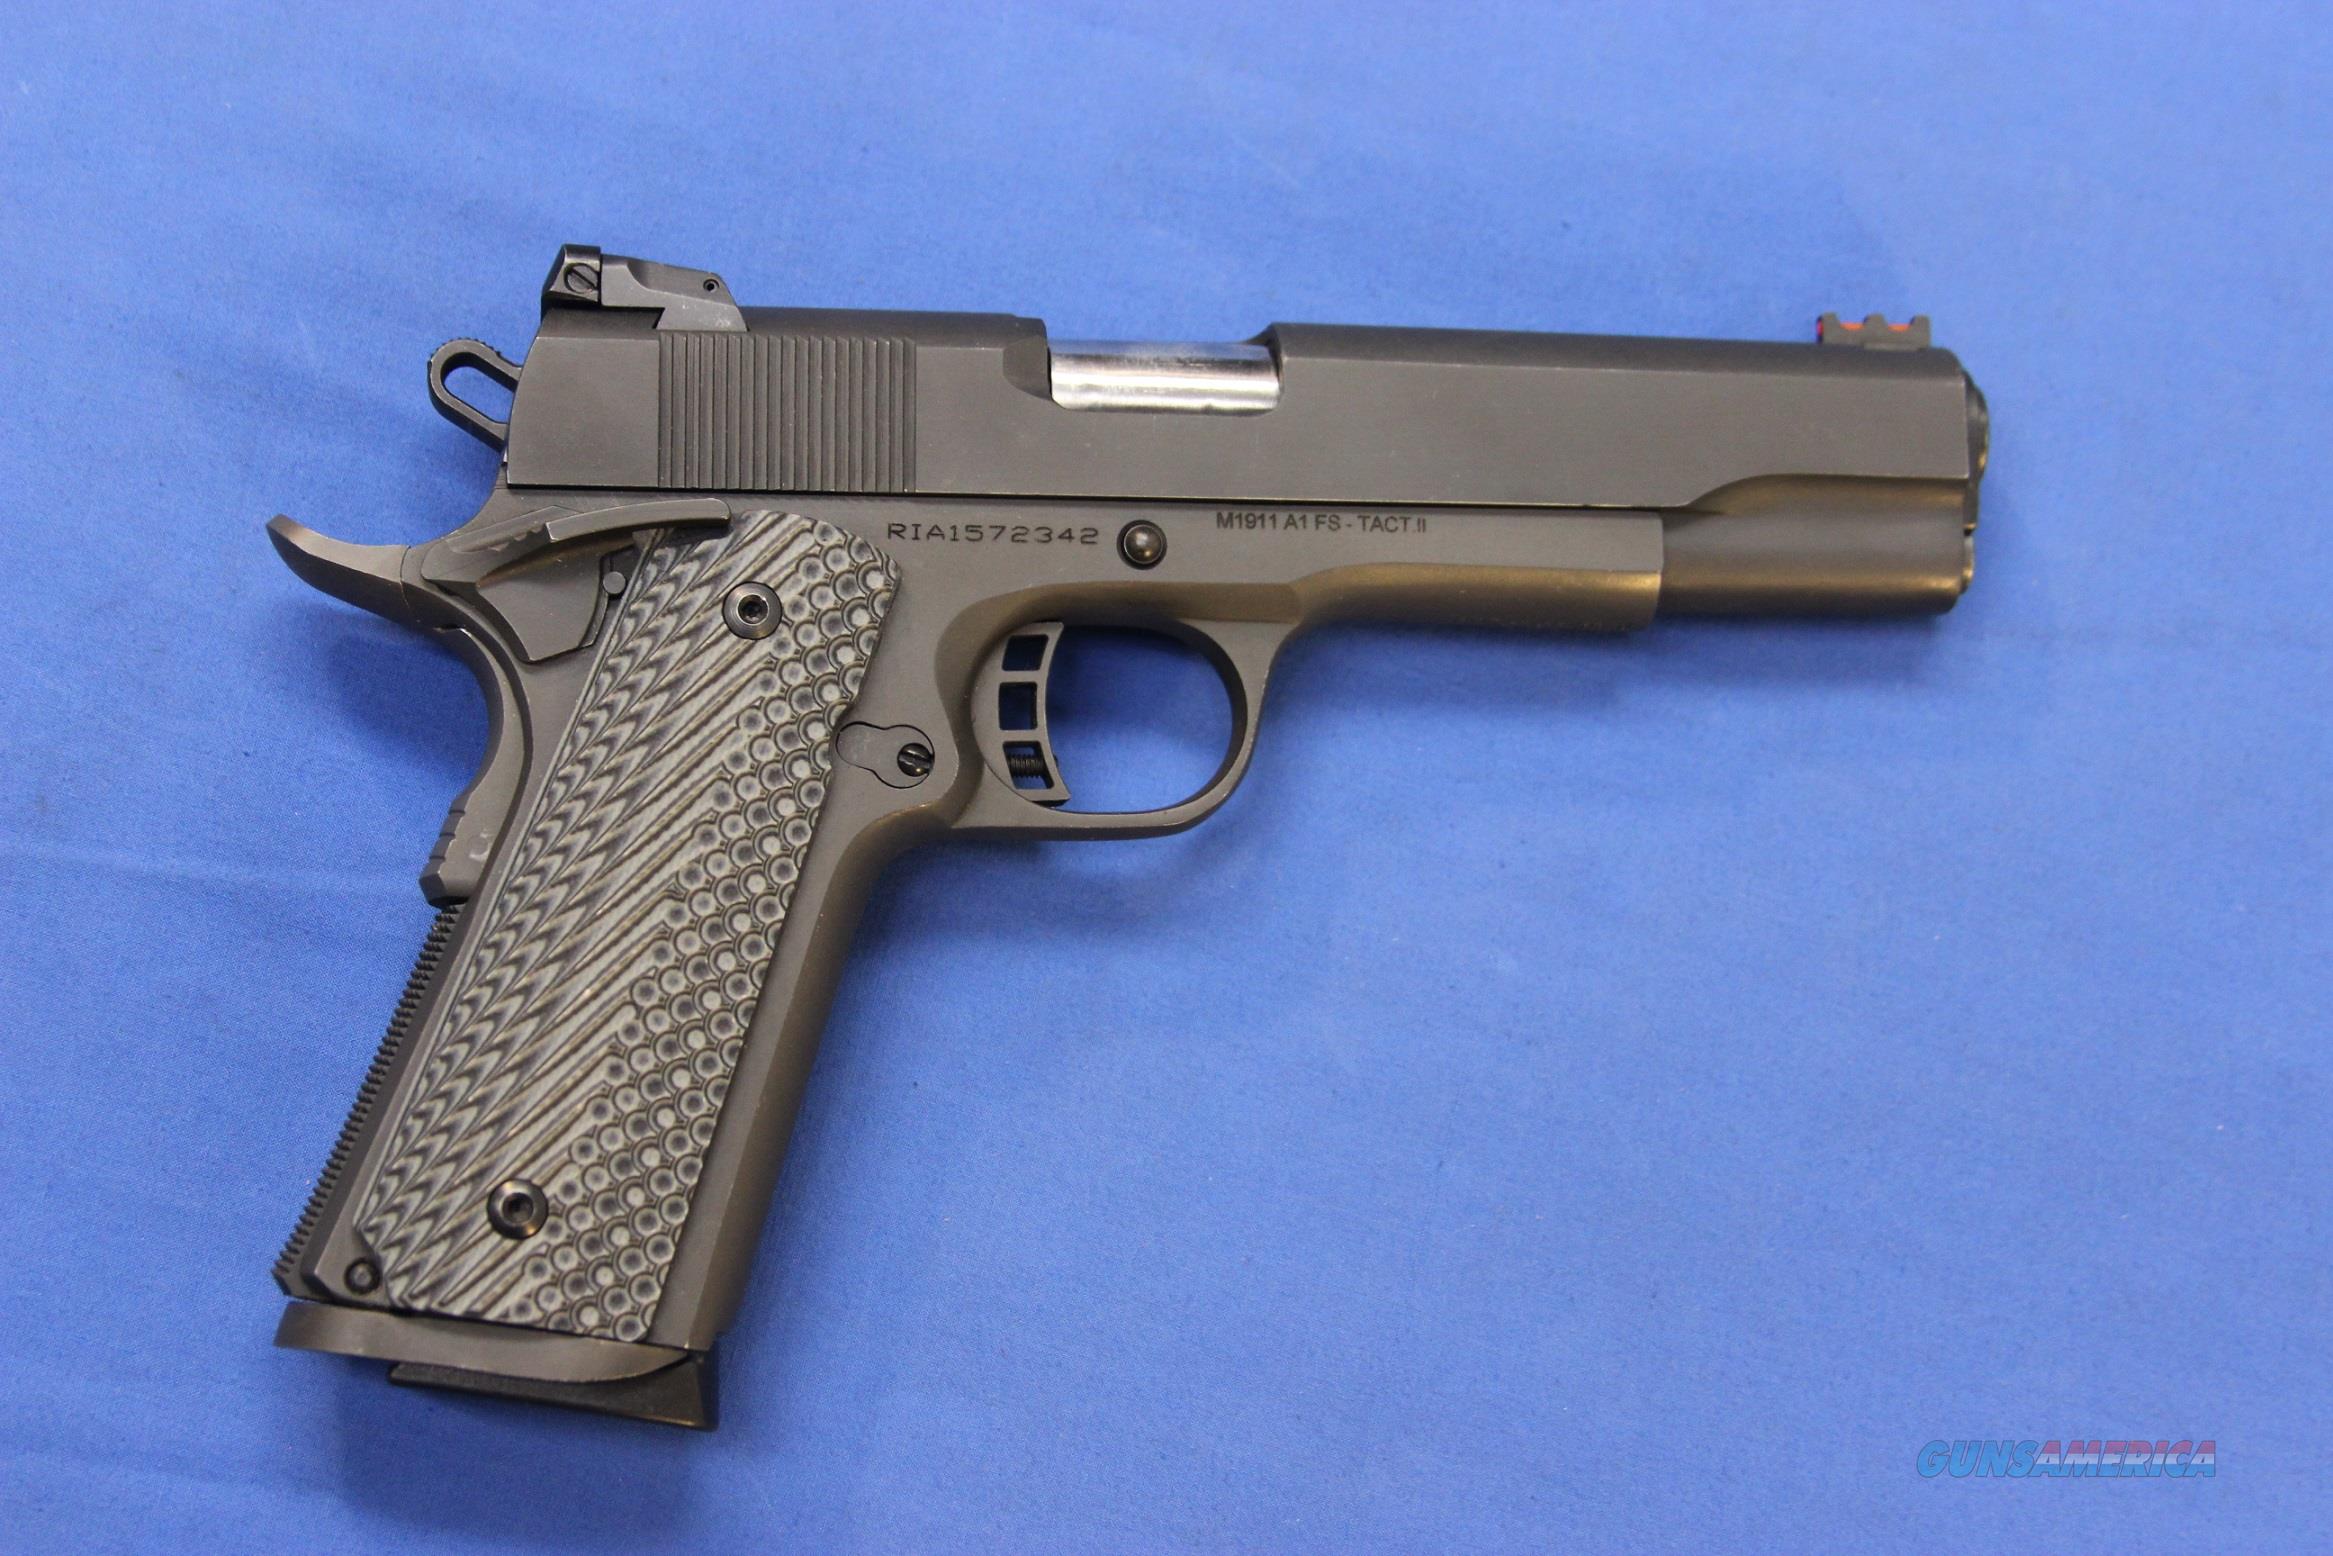 Rock Island Armory 1911 A1 Fs Tacti For Sale At 955747398 6918